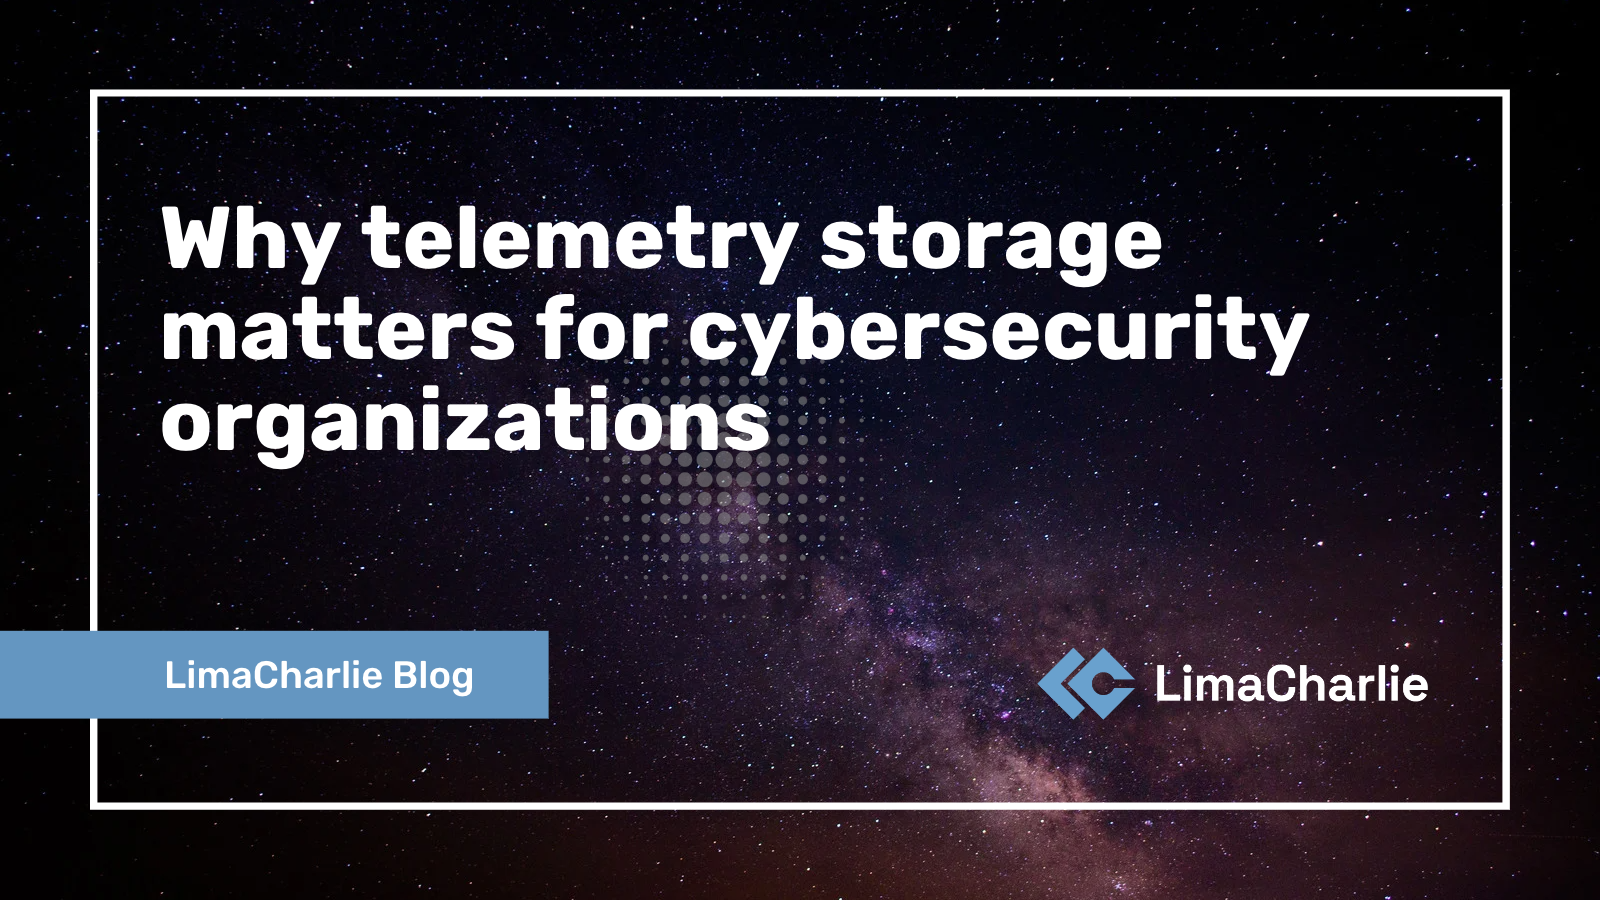 Why telemetry storage matters for cybersecurity organizations